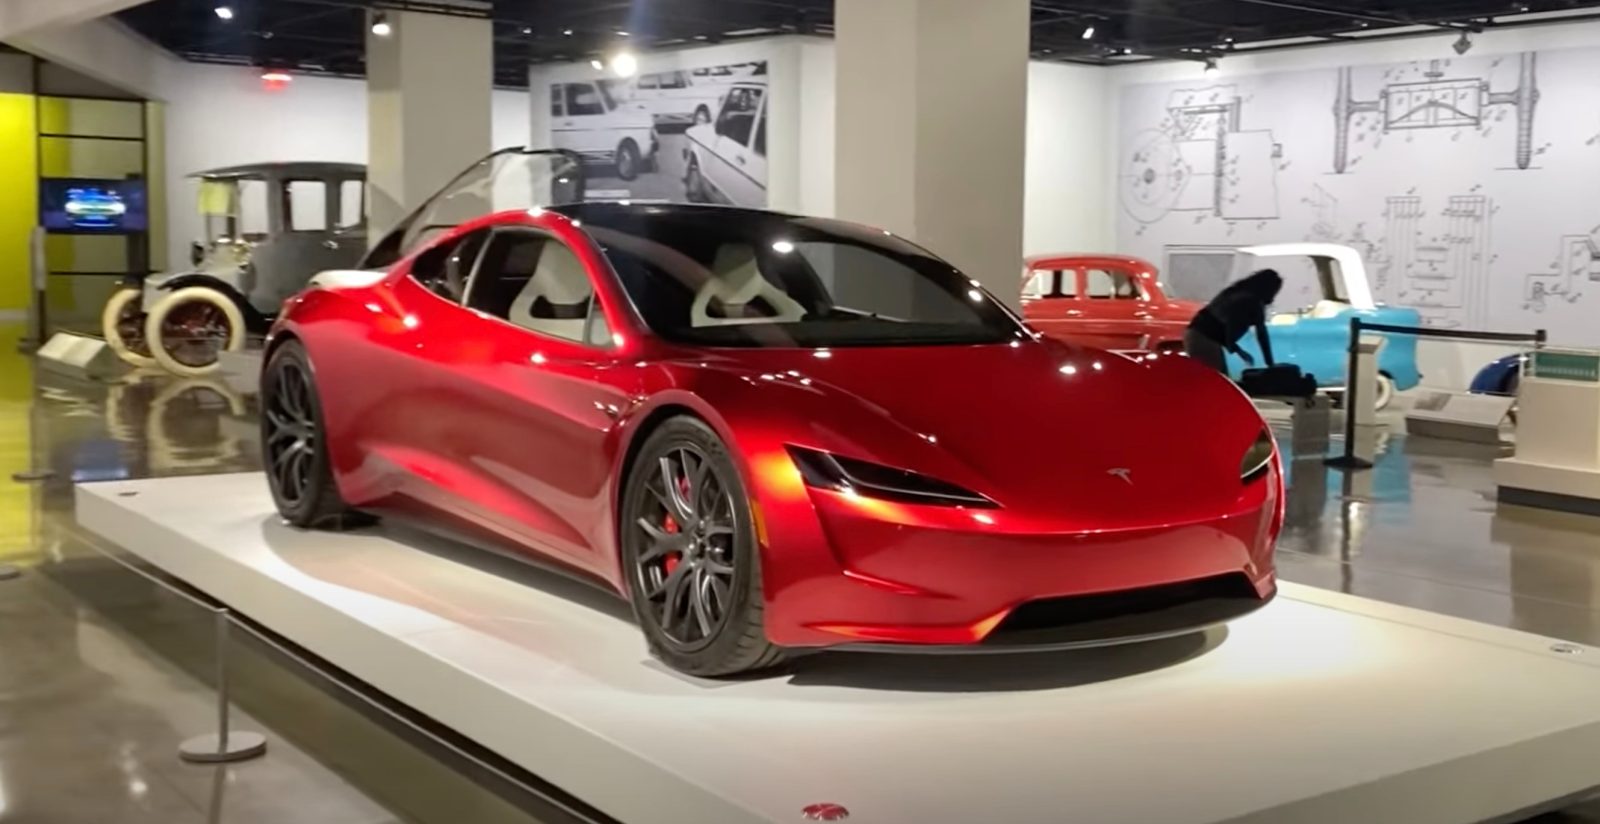 Close look at rare Tesla Roadster outing ahead of production